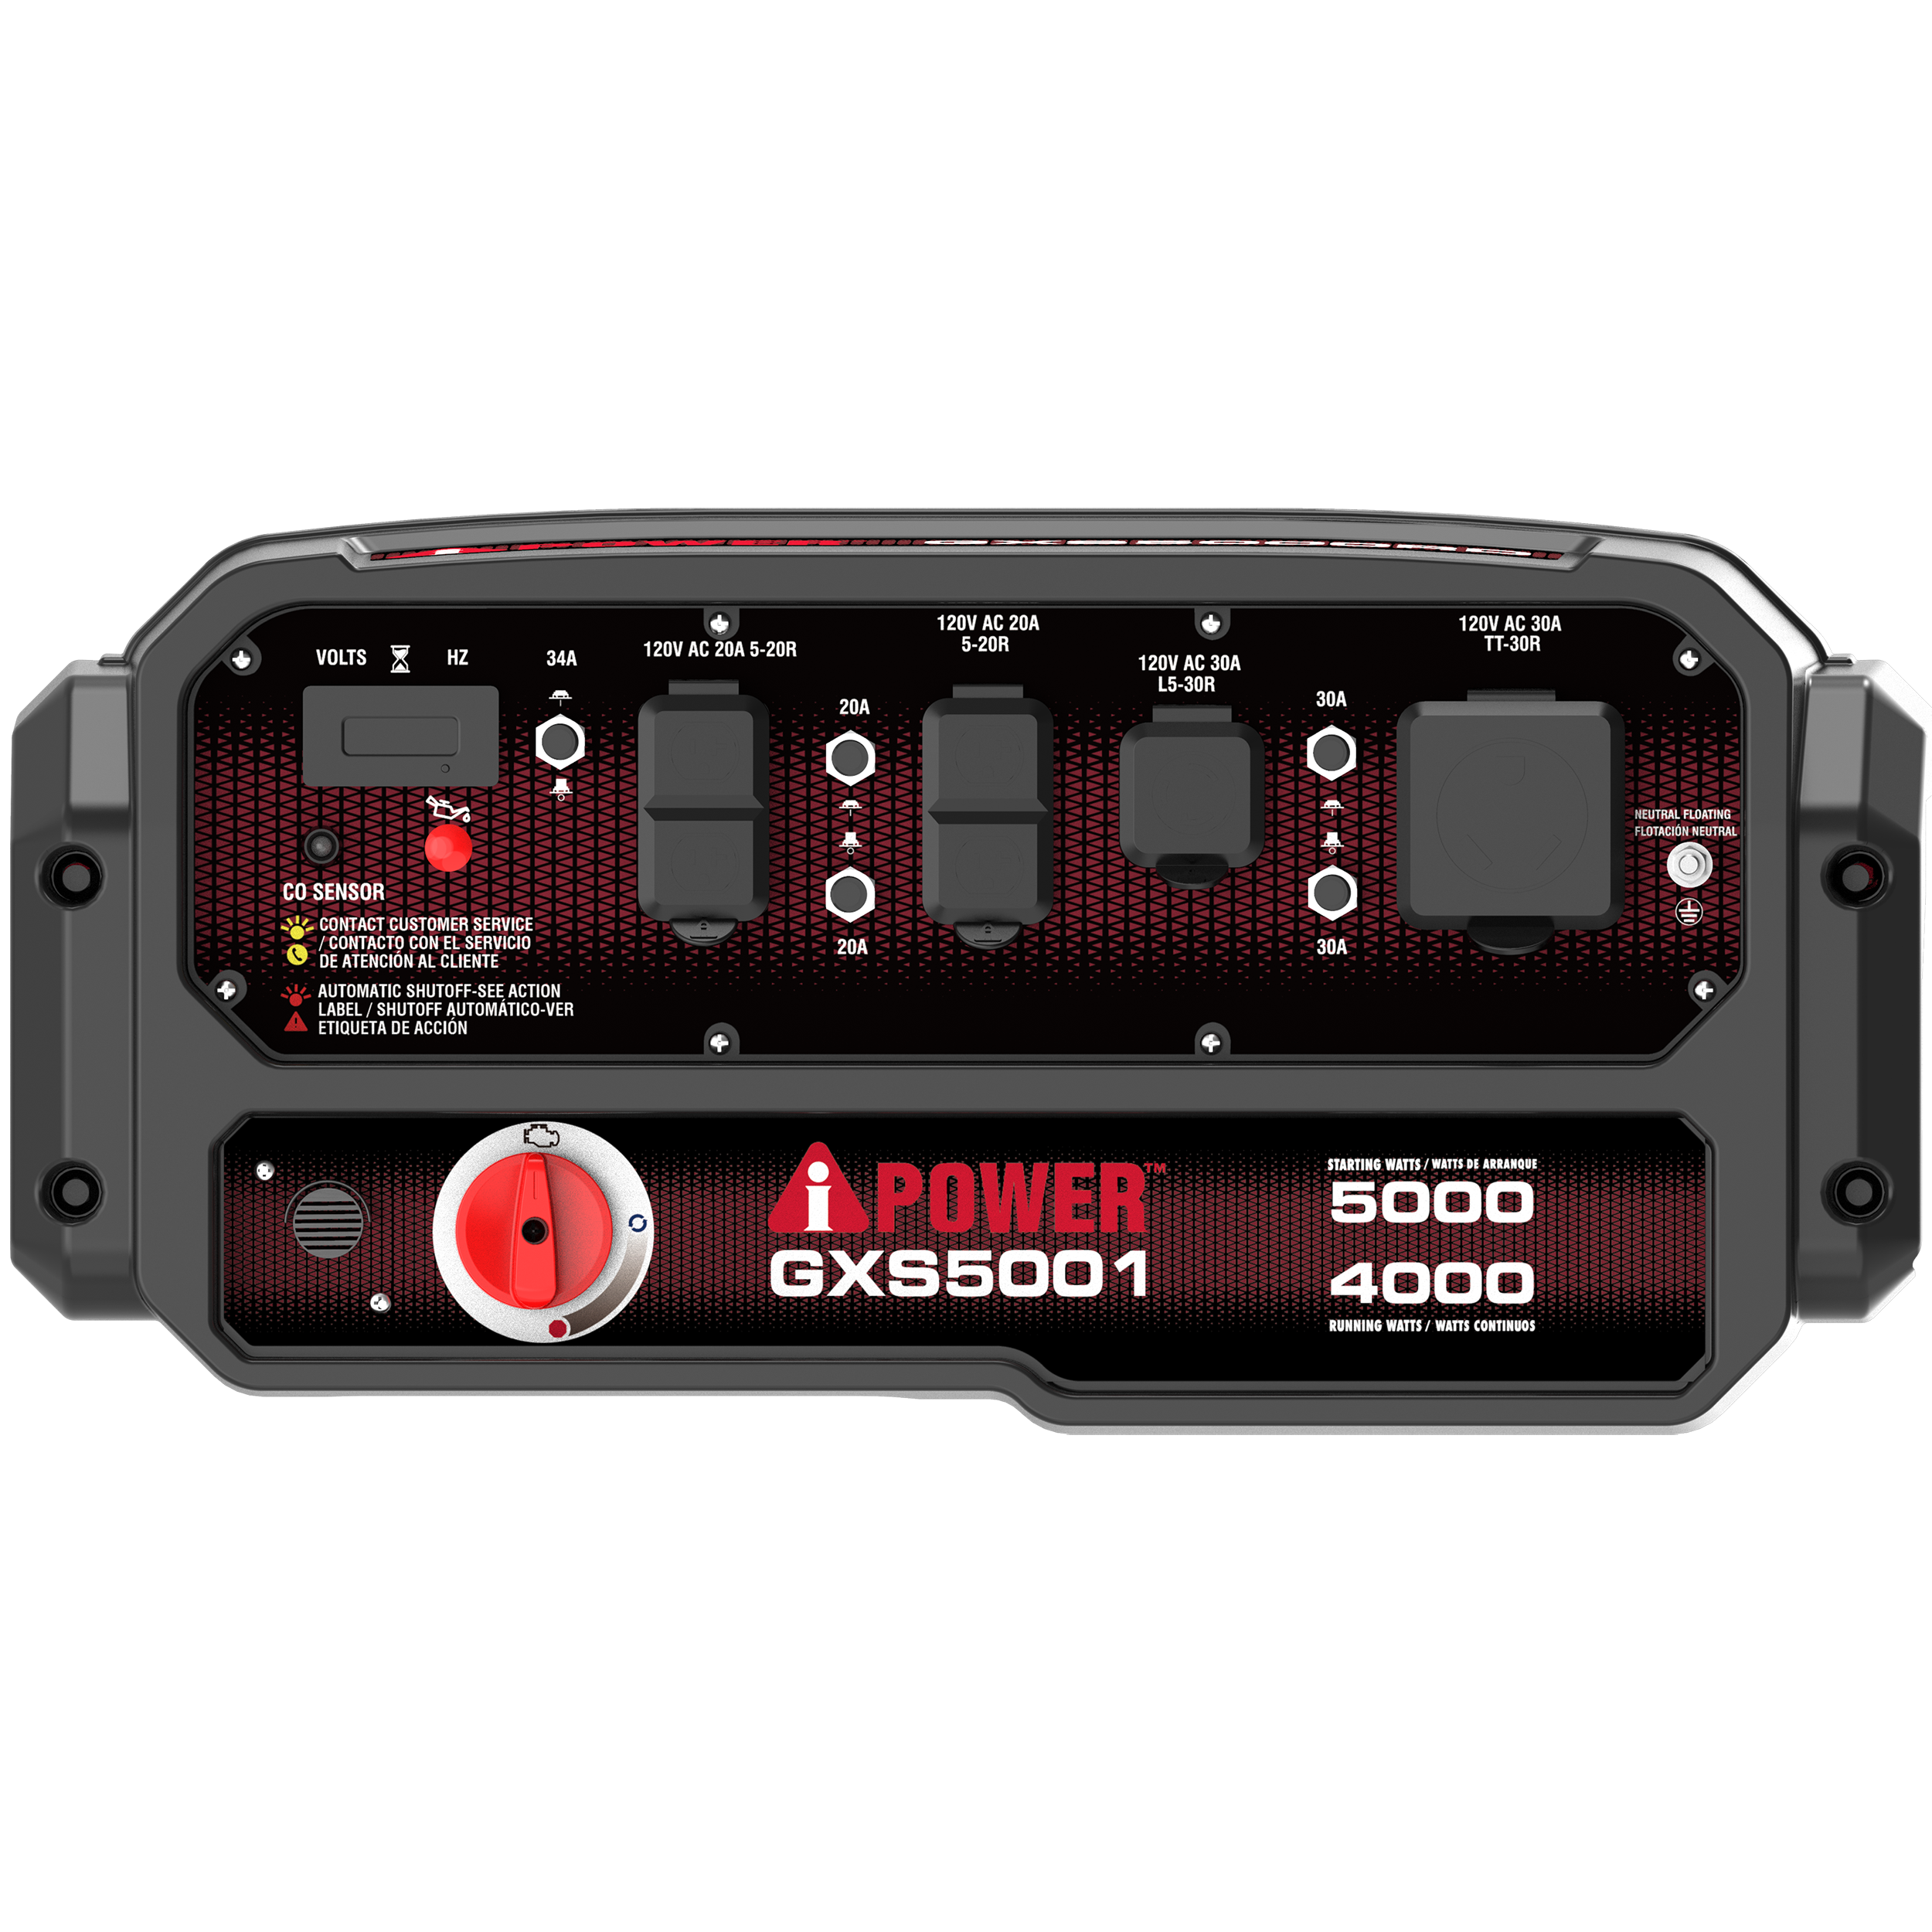 GXS5001 - A-iPower Portable Generator - Control Panel.png__PID:7d353c61-bead-4df4-8f97-4f0bc2503f8e